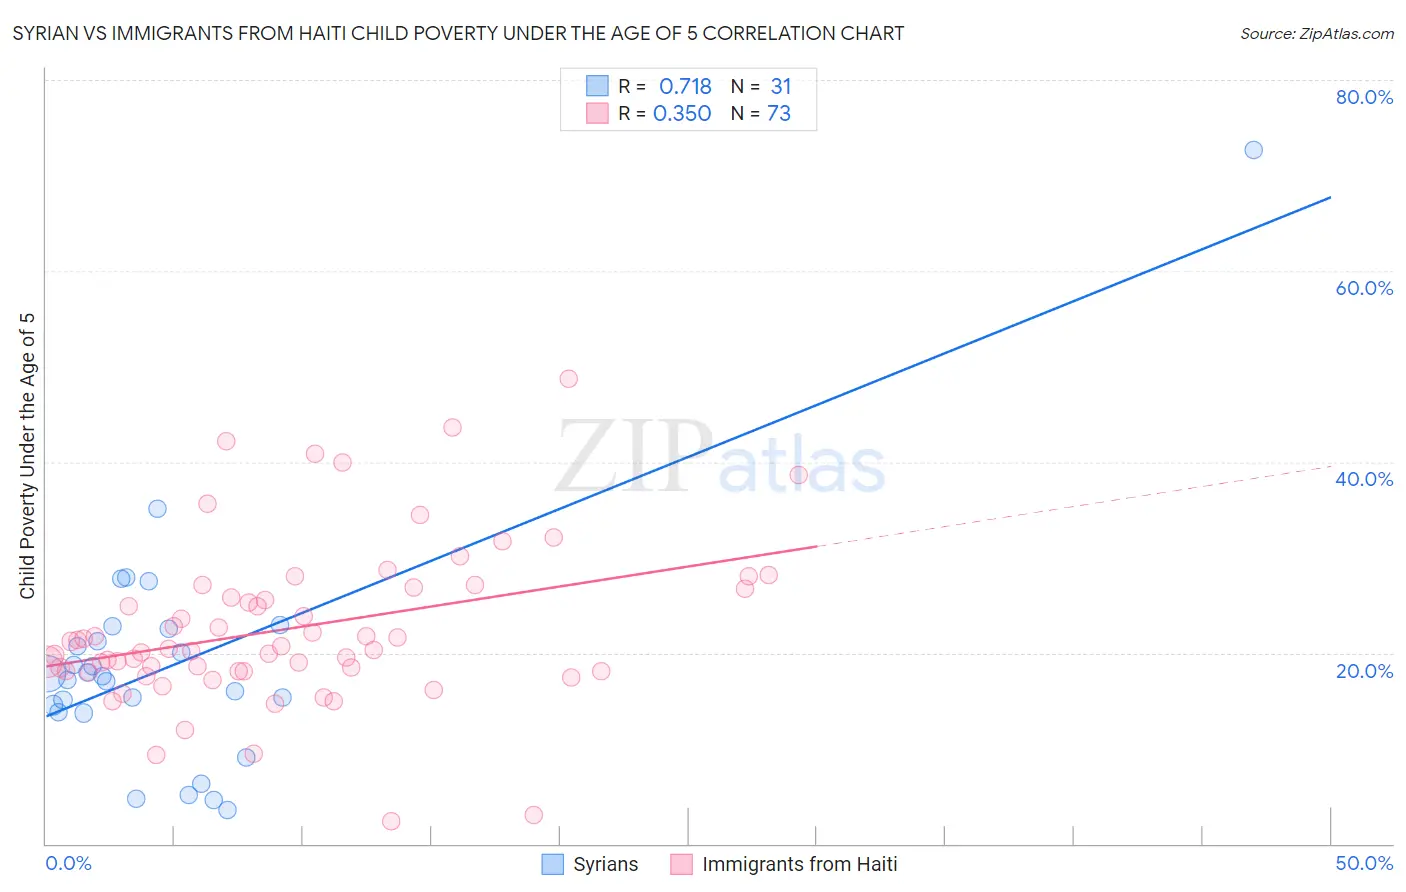 Syrian vs Immigrants from Haiti Child Poverty Under the Age of 5